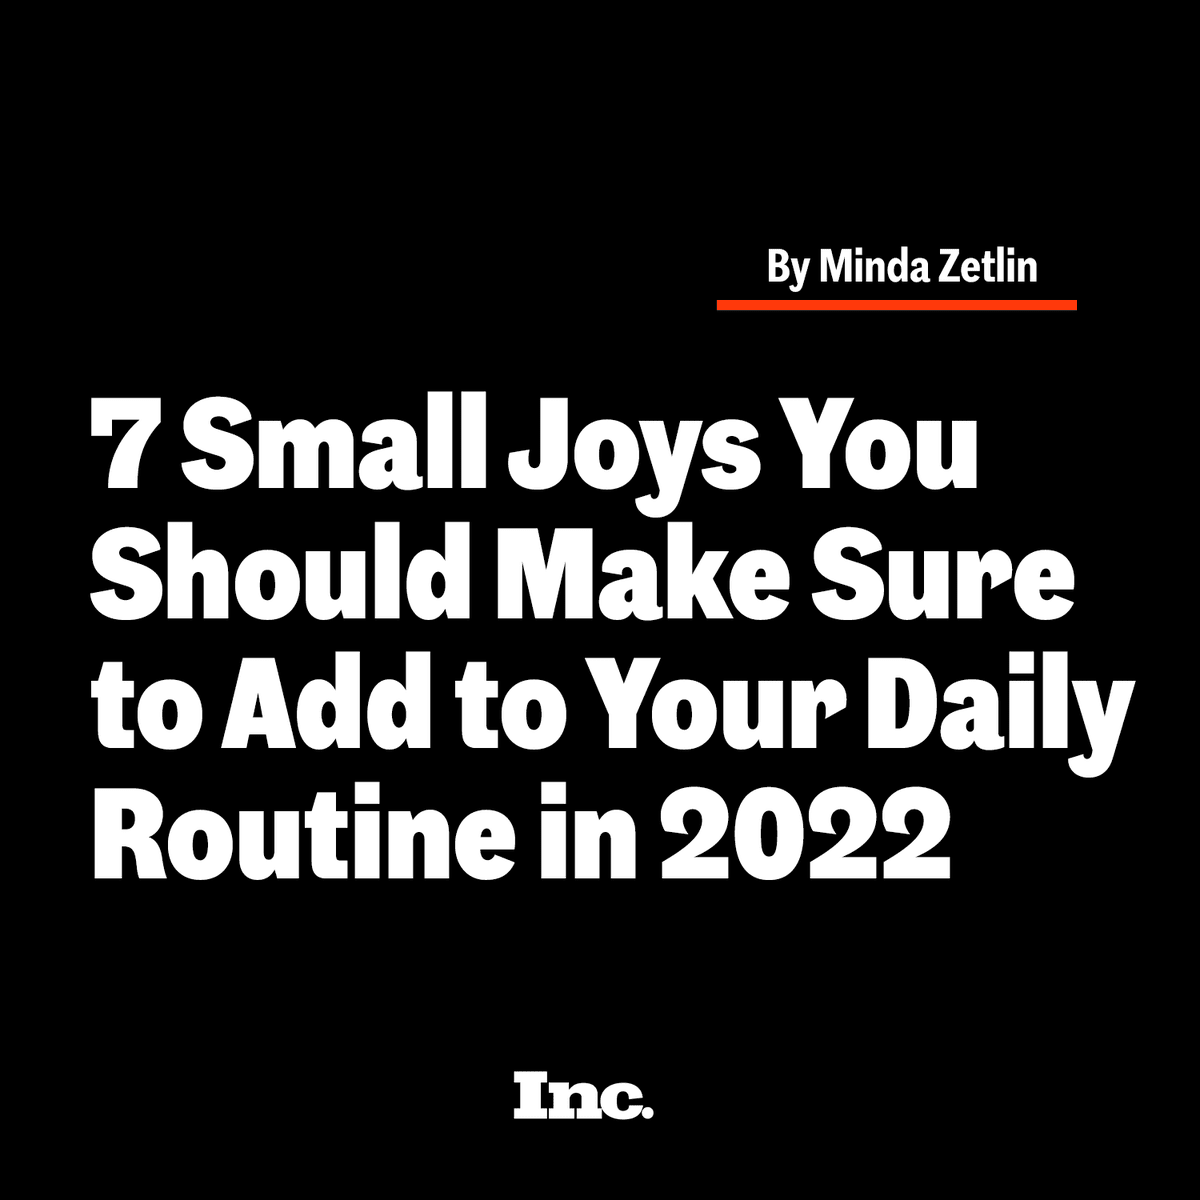 Prioritize your happiness this year.